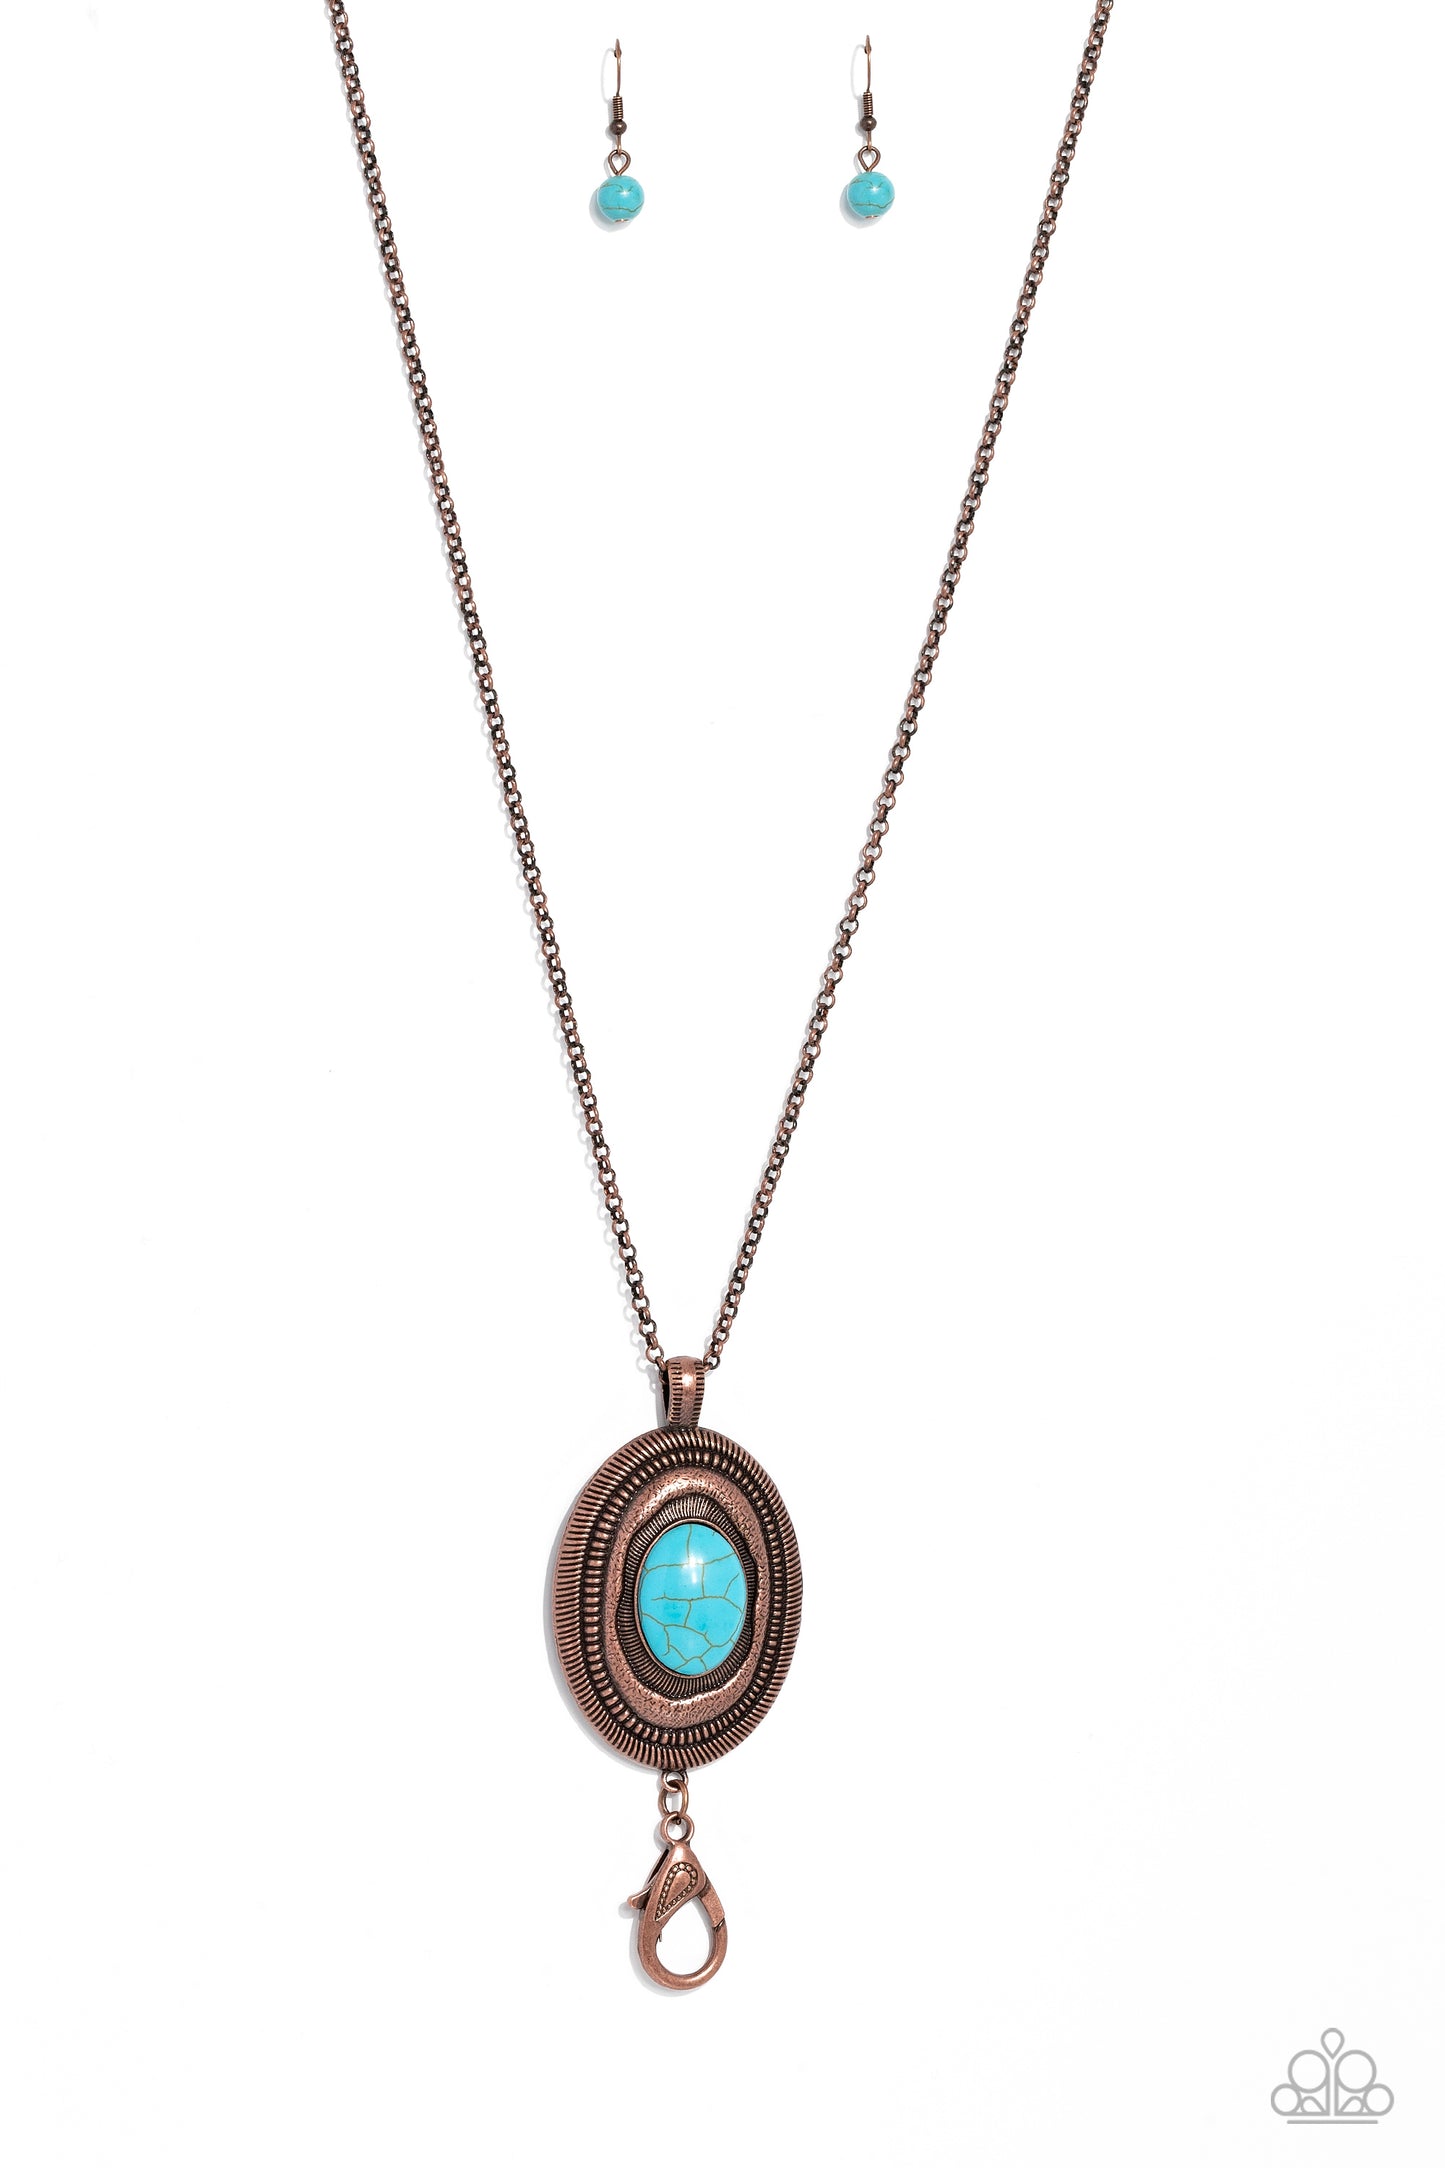 Sierra Sage - Copper Turquoise Crackle Stone Lanyard Necklace